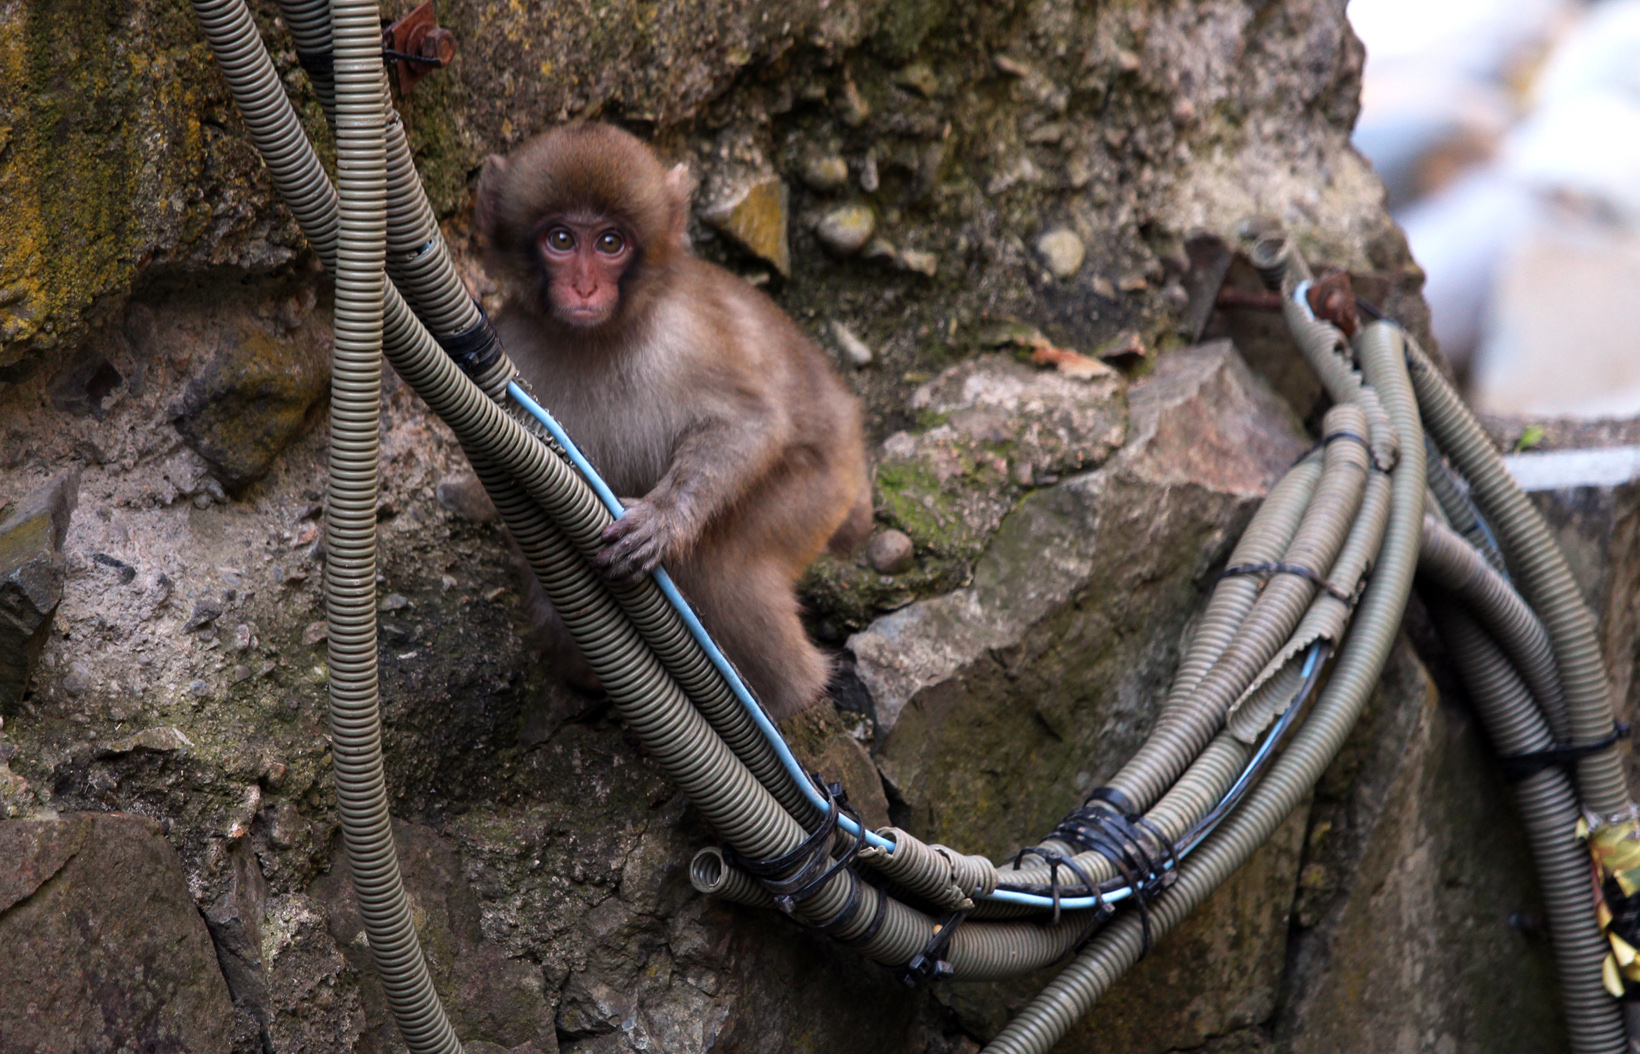 Whilst the adults are busy foraging for food or grooming each other, the young will play and explore! Like a child's favourite toy chewed and much loved, so are the cabling that humans have conveniently placed within reach.